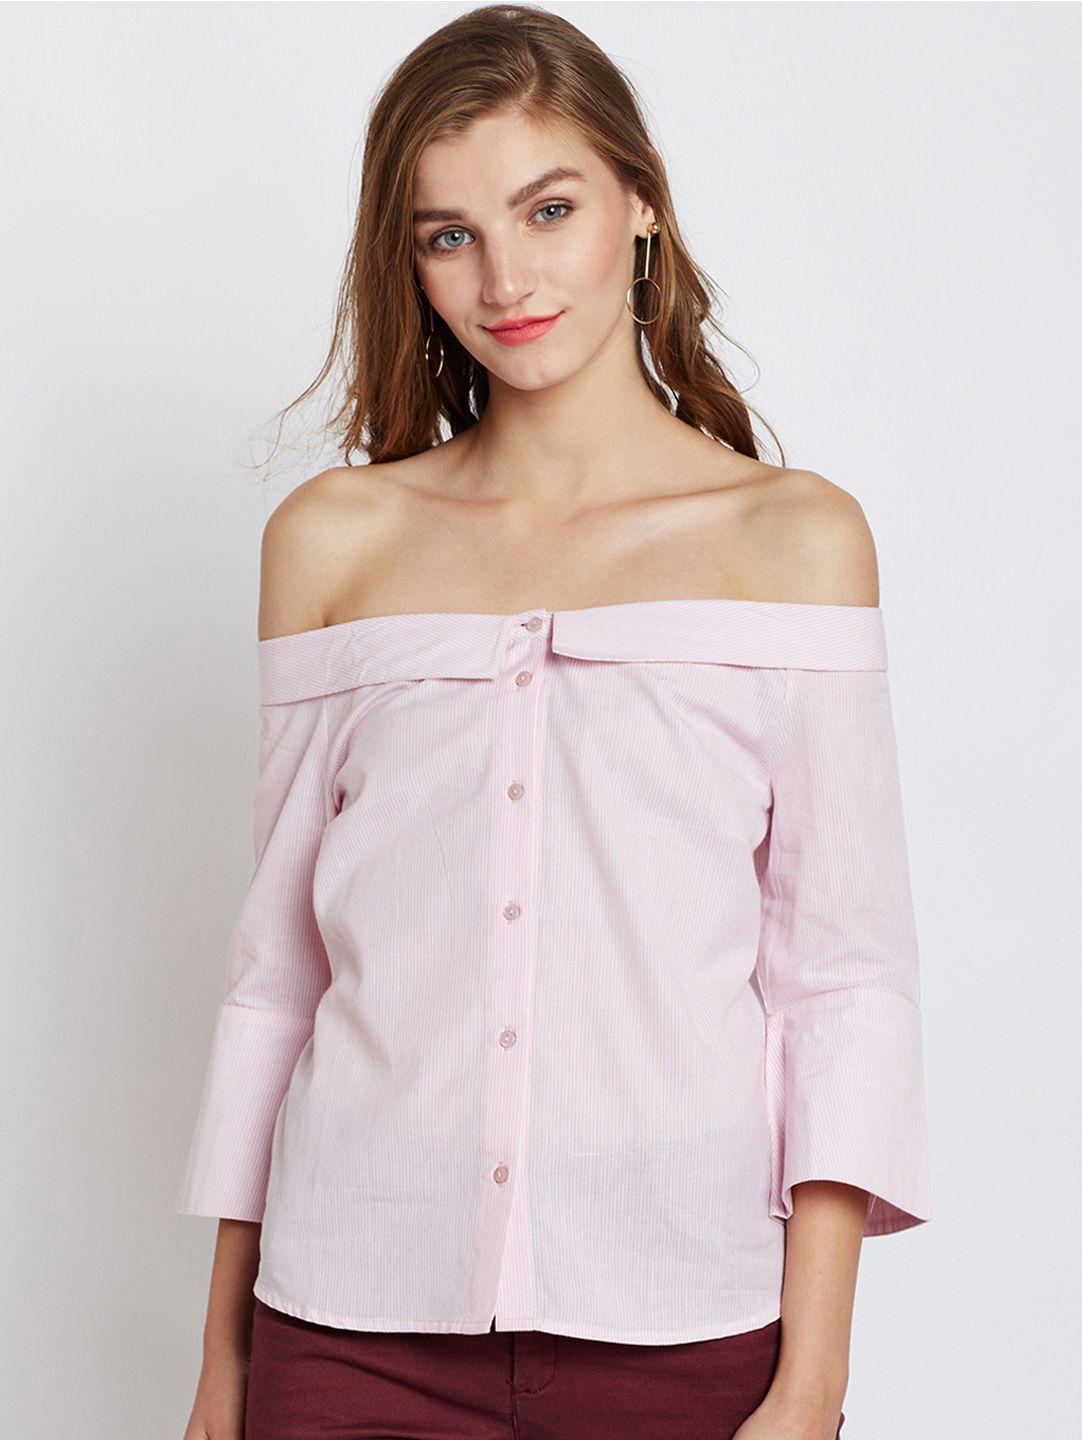 marie-claire-women-pink-striped-bardot-top